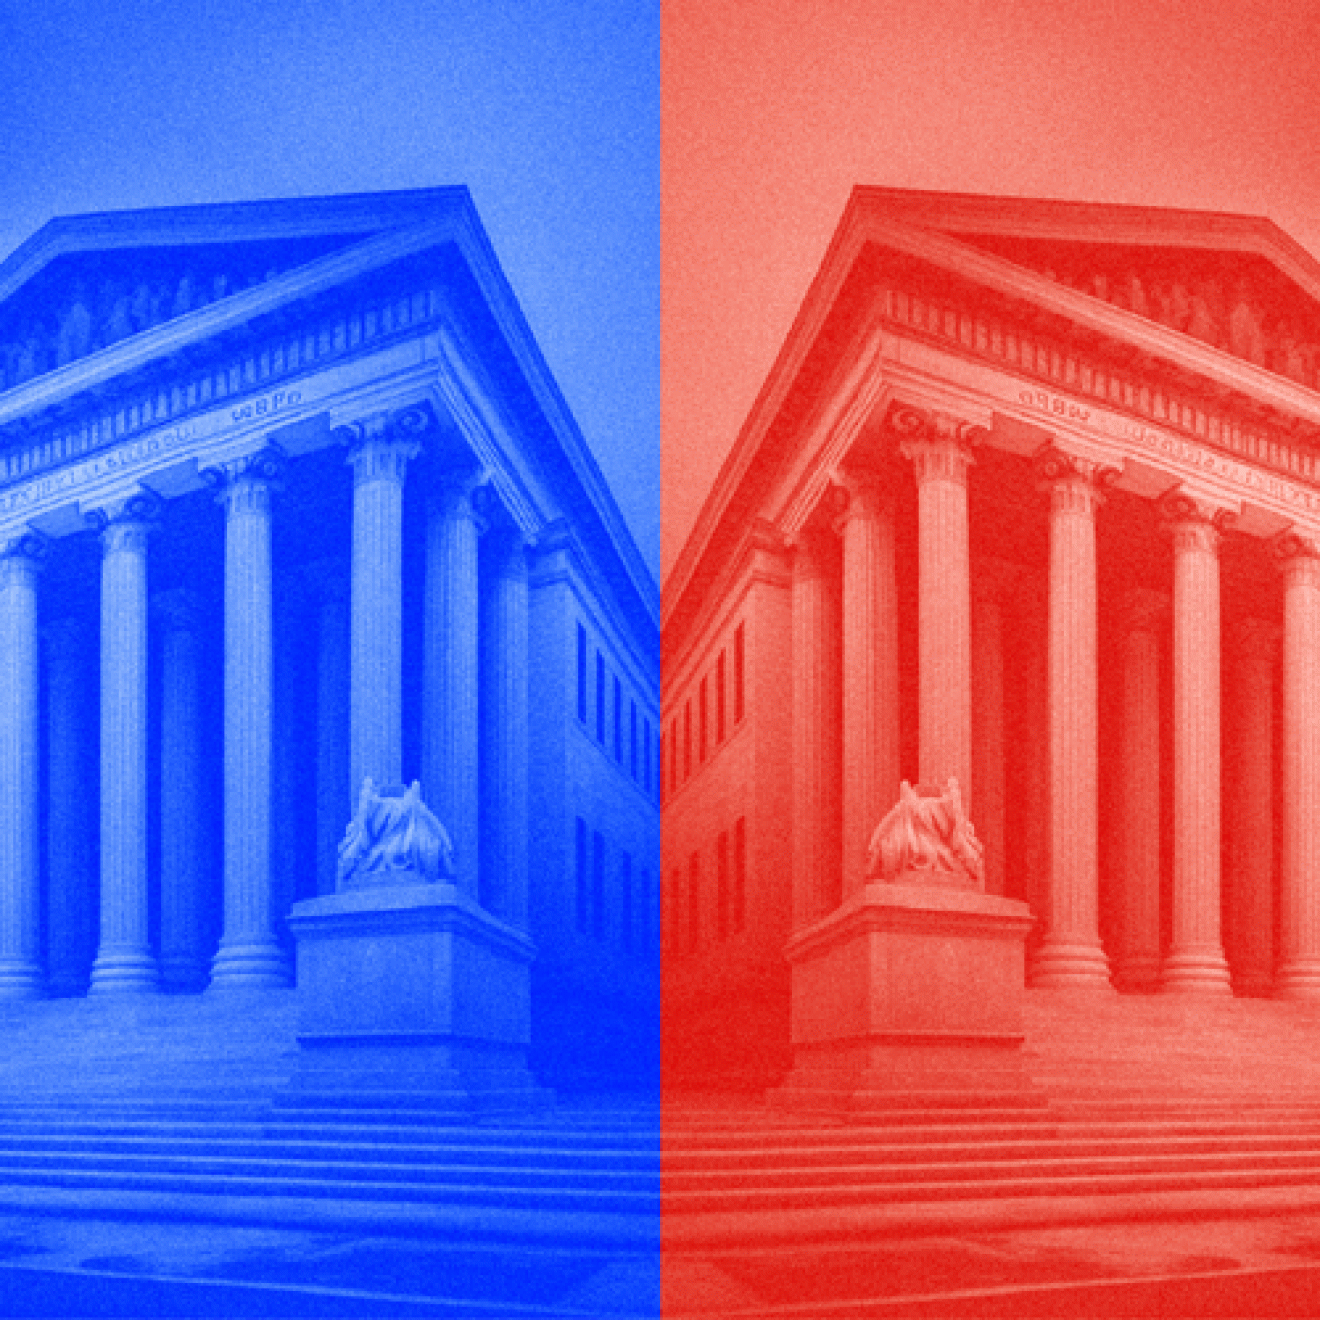 Image of the Supreme Court building, the left side with a blue overlay, the right side with a red overlay